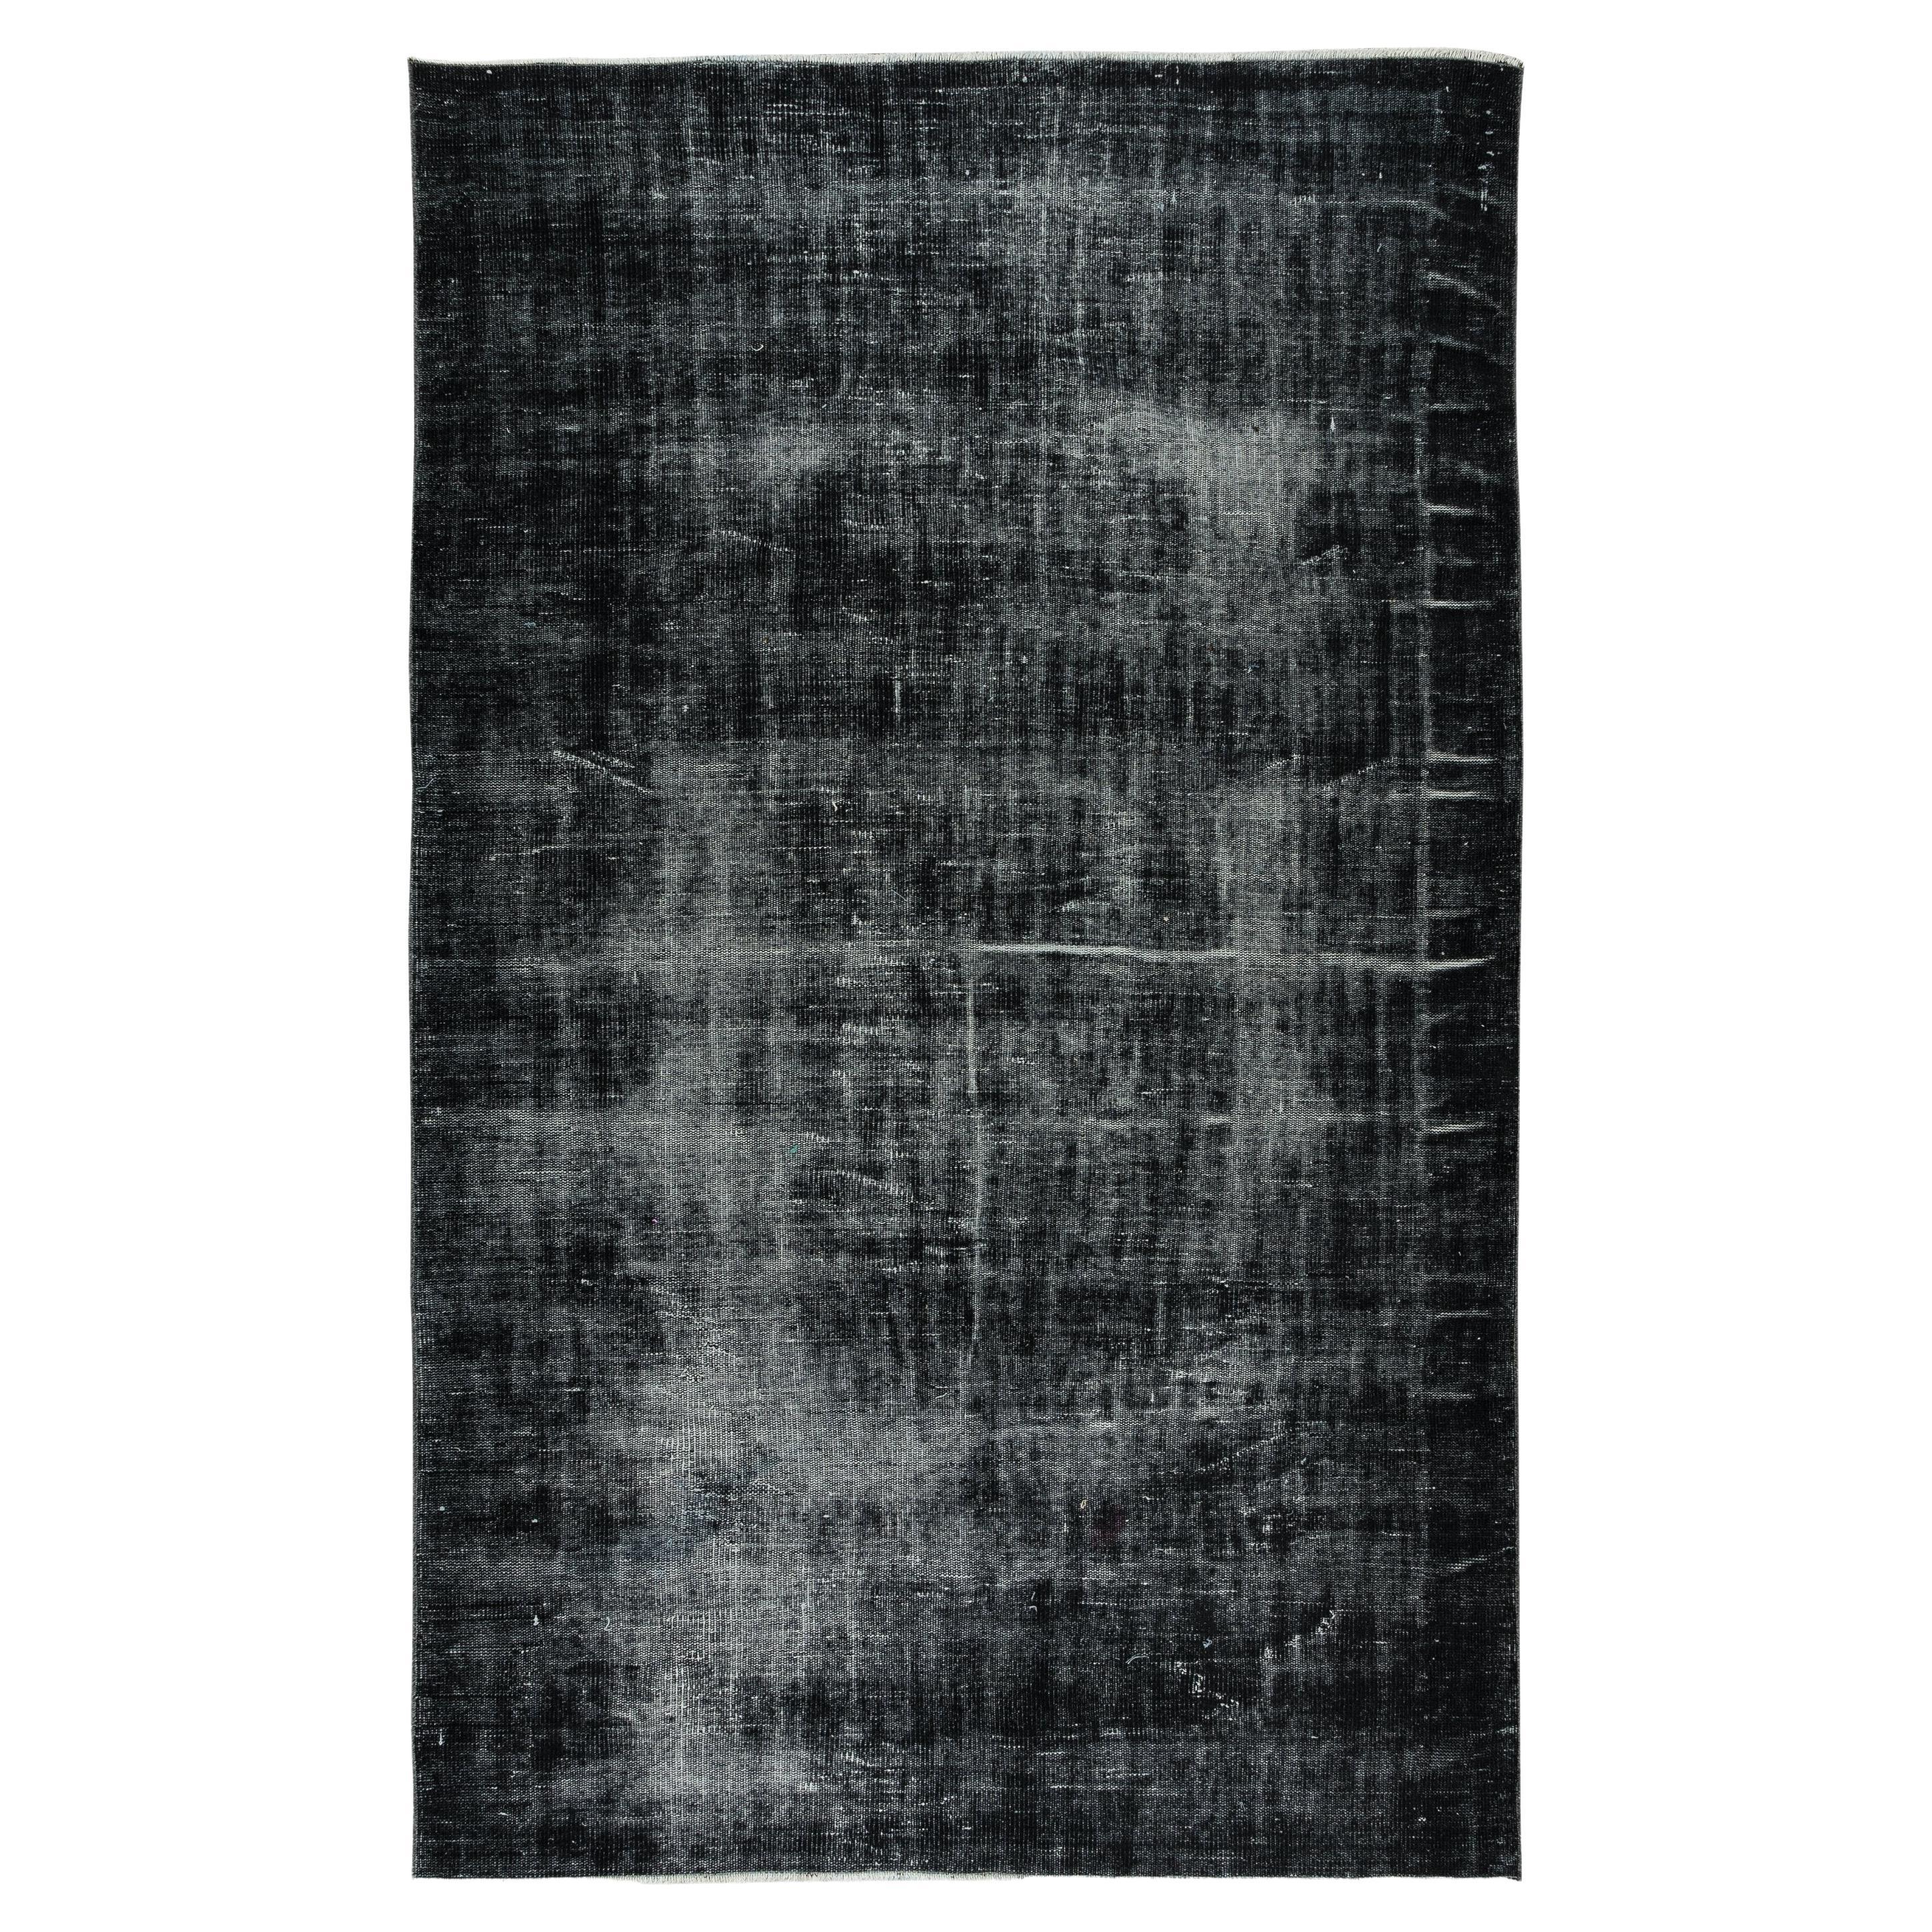 5.7x9.2 Ft Distressed Vintage Handmade Turkish Area Rug Over-Dyed in Black